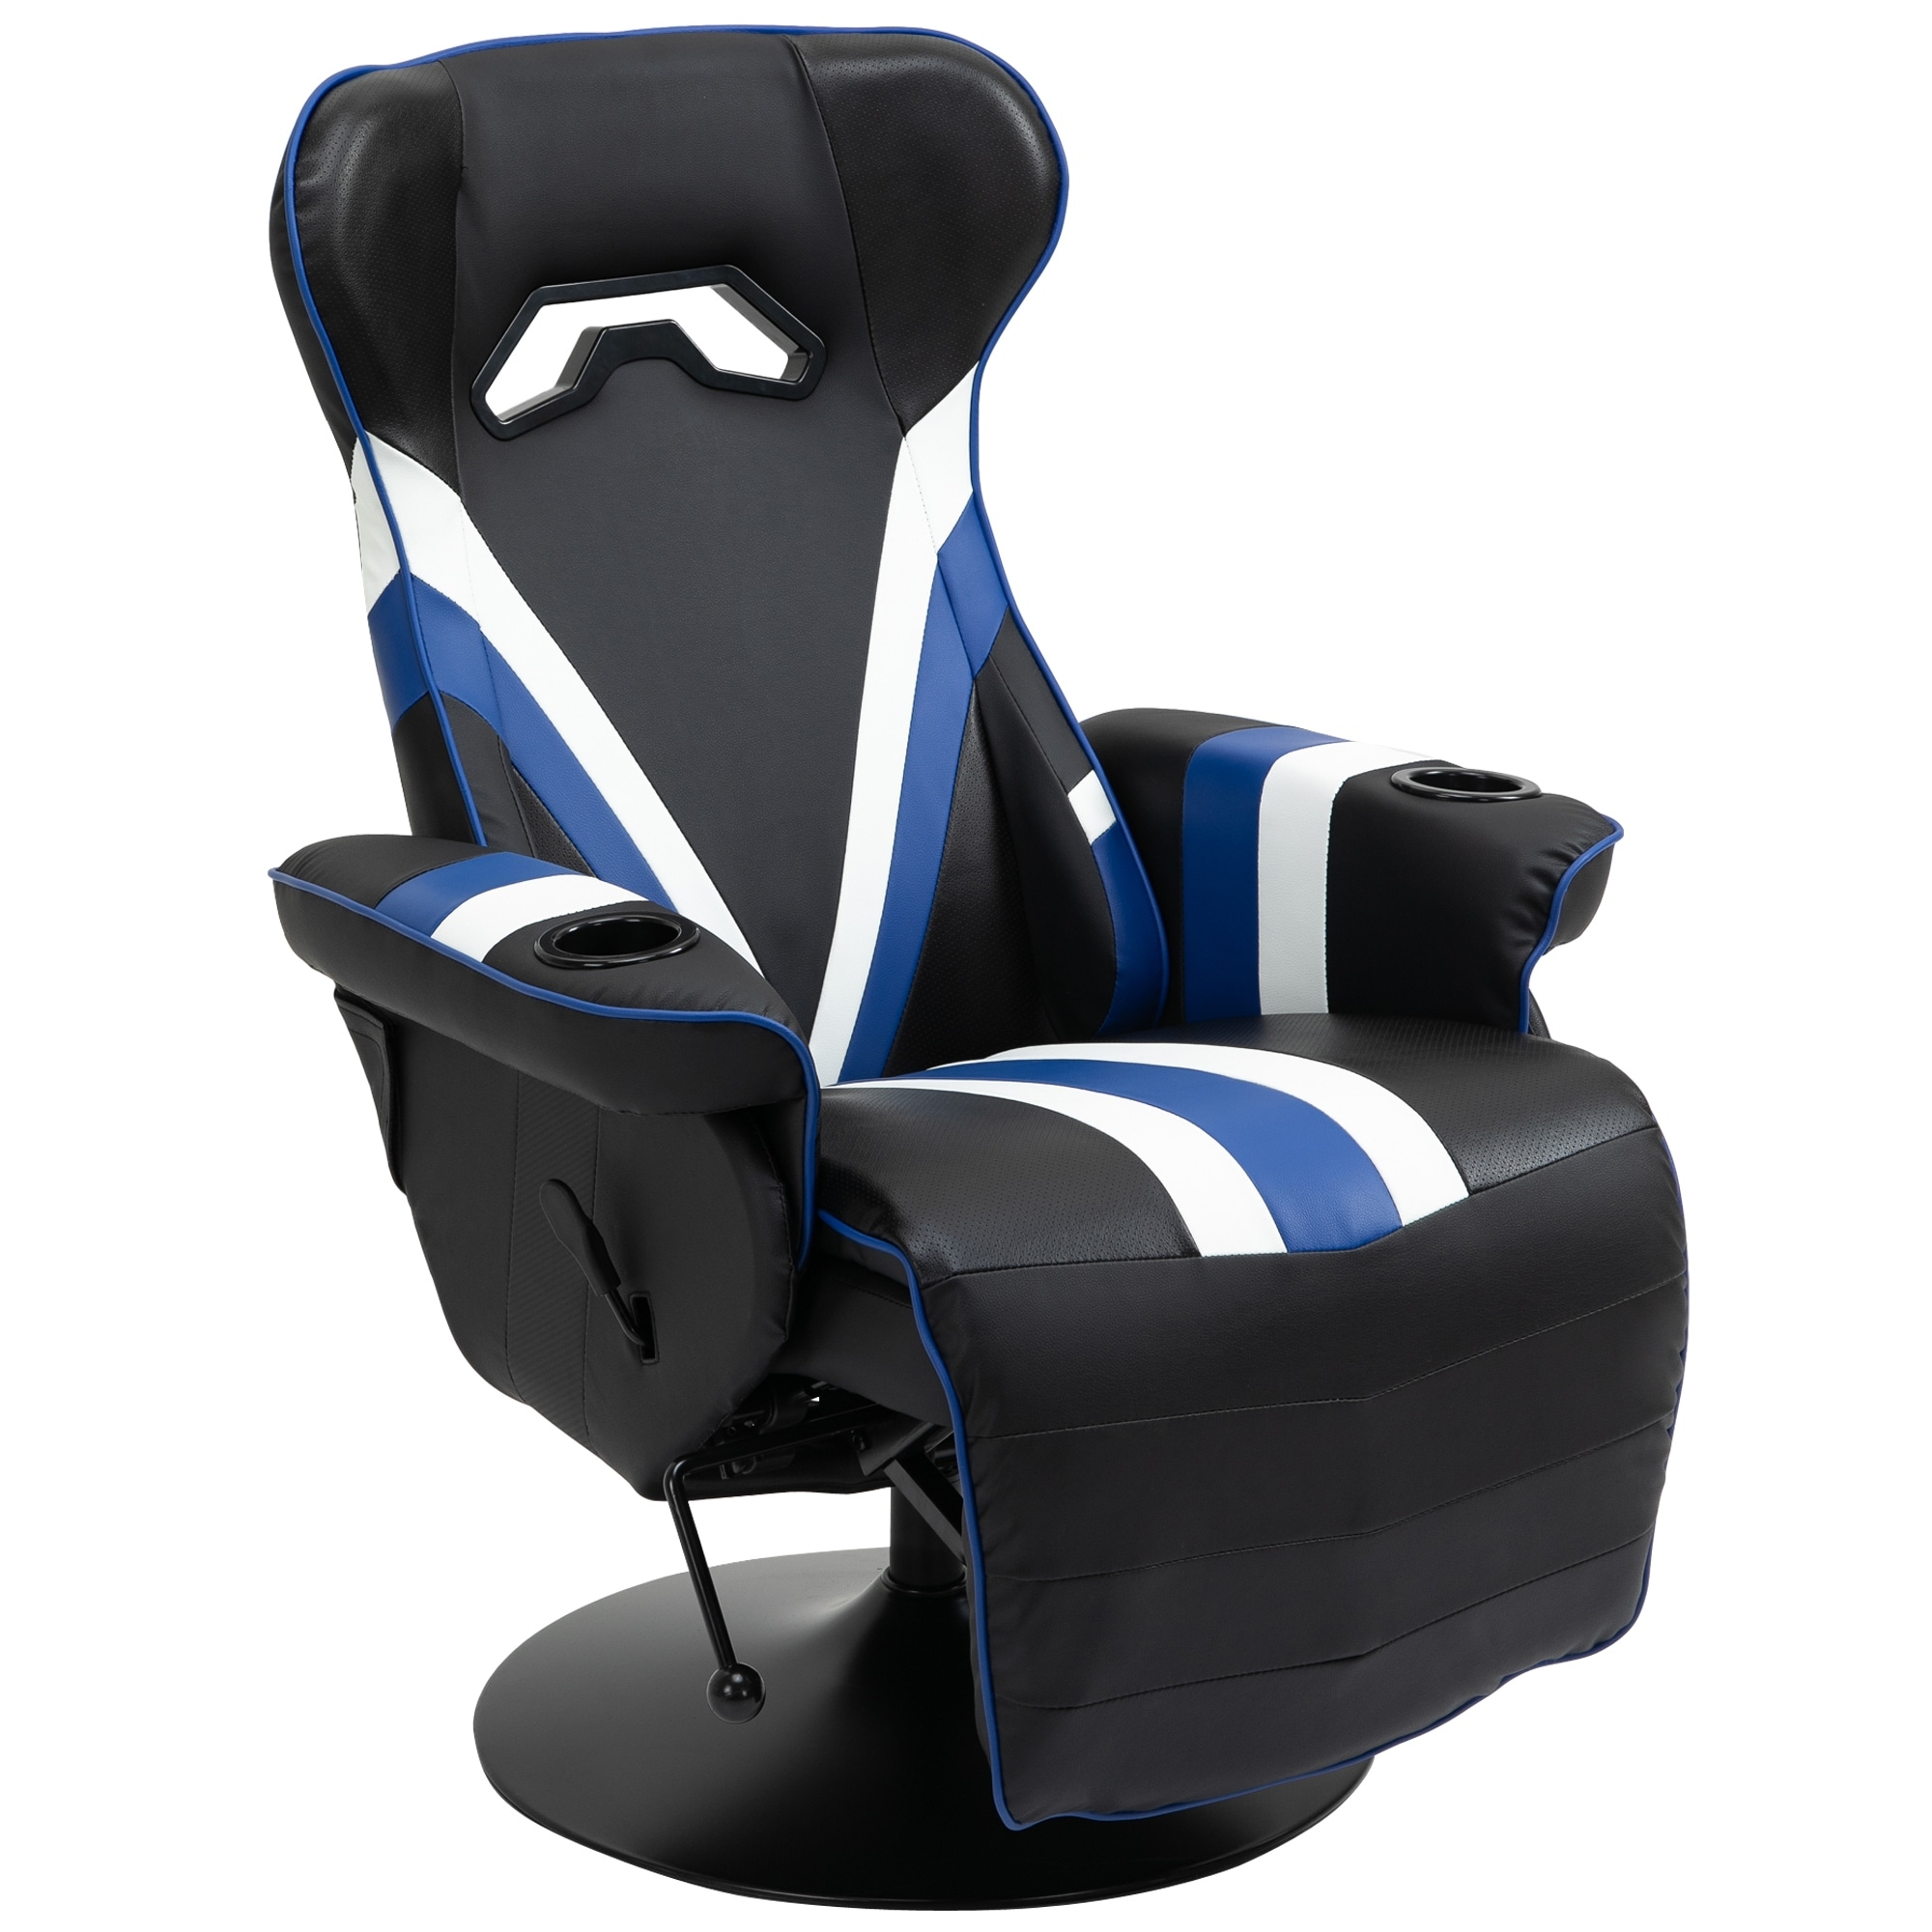 https://ak1.ostkcdn.com/images/products/is/images/direct/635d94e7996eac2286caddc311a9fd8b4cca55db/Vinsetto-Race-Video-Game-Chair-with-Reclining-Backrest-and-Footrest%2C-Headrest%2C-and-Cup-Holder.jpg